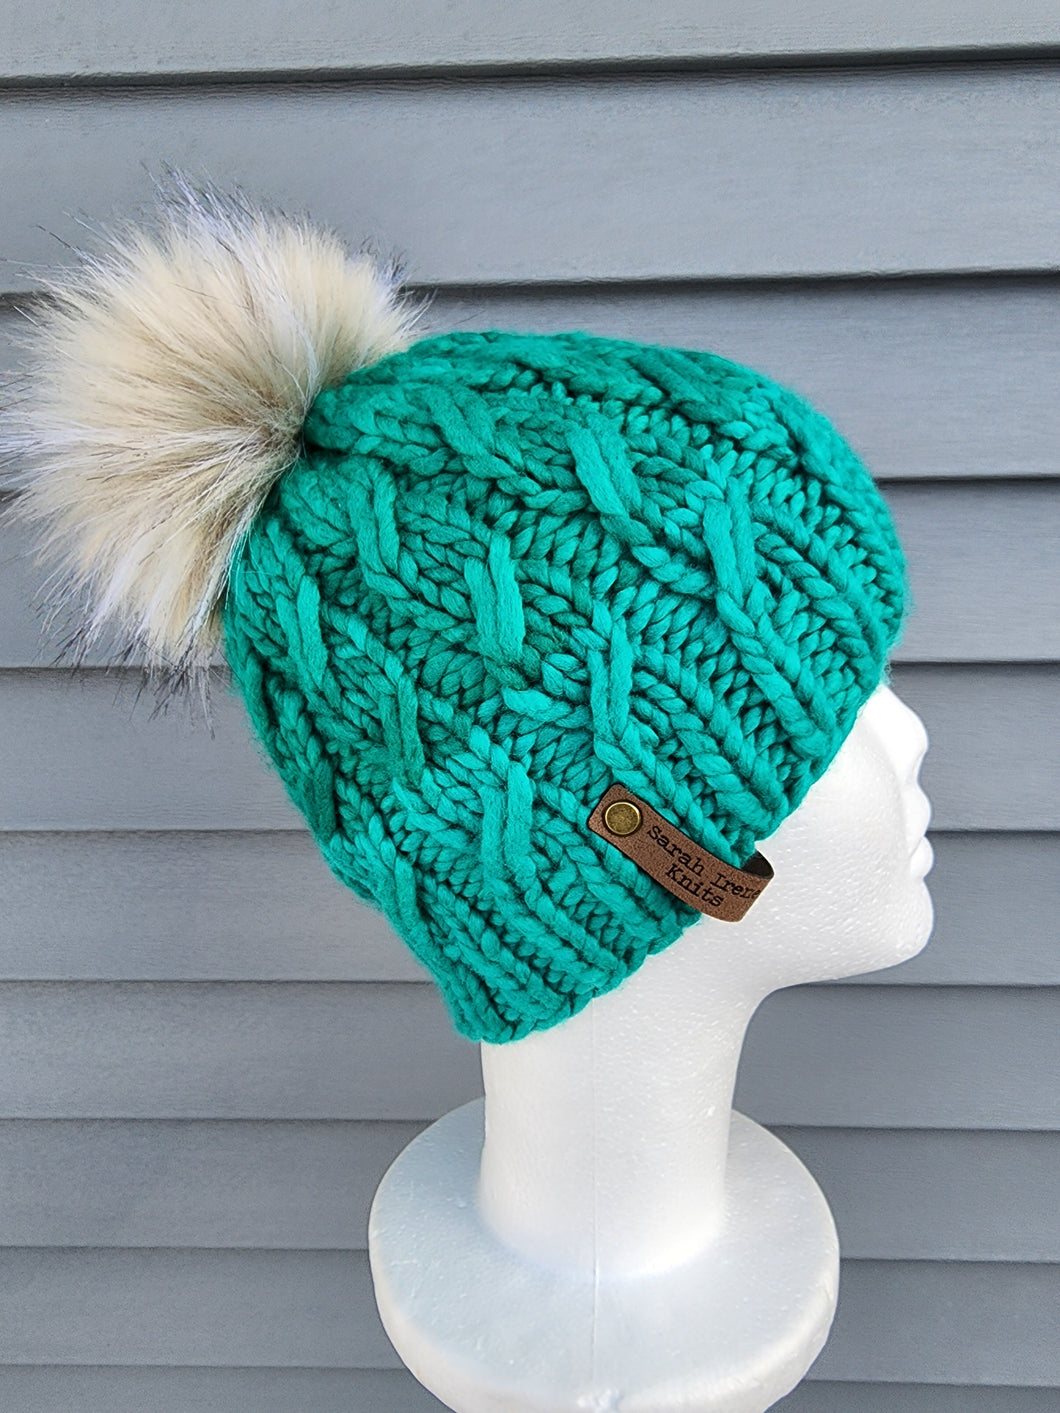 Braided effect beanie in subtle two-tone teal green color, topped with a large faux fur pom in ivory color.